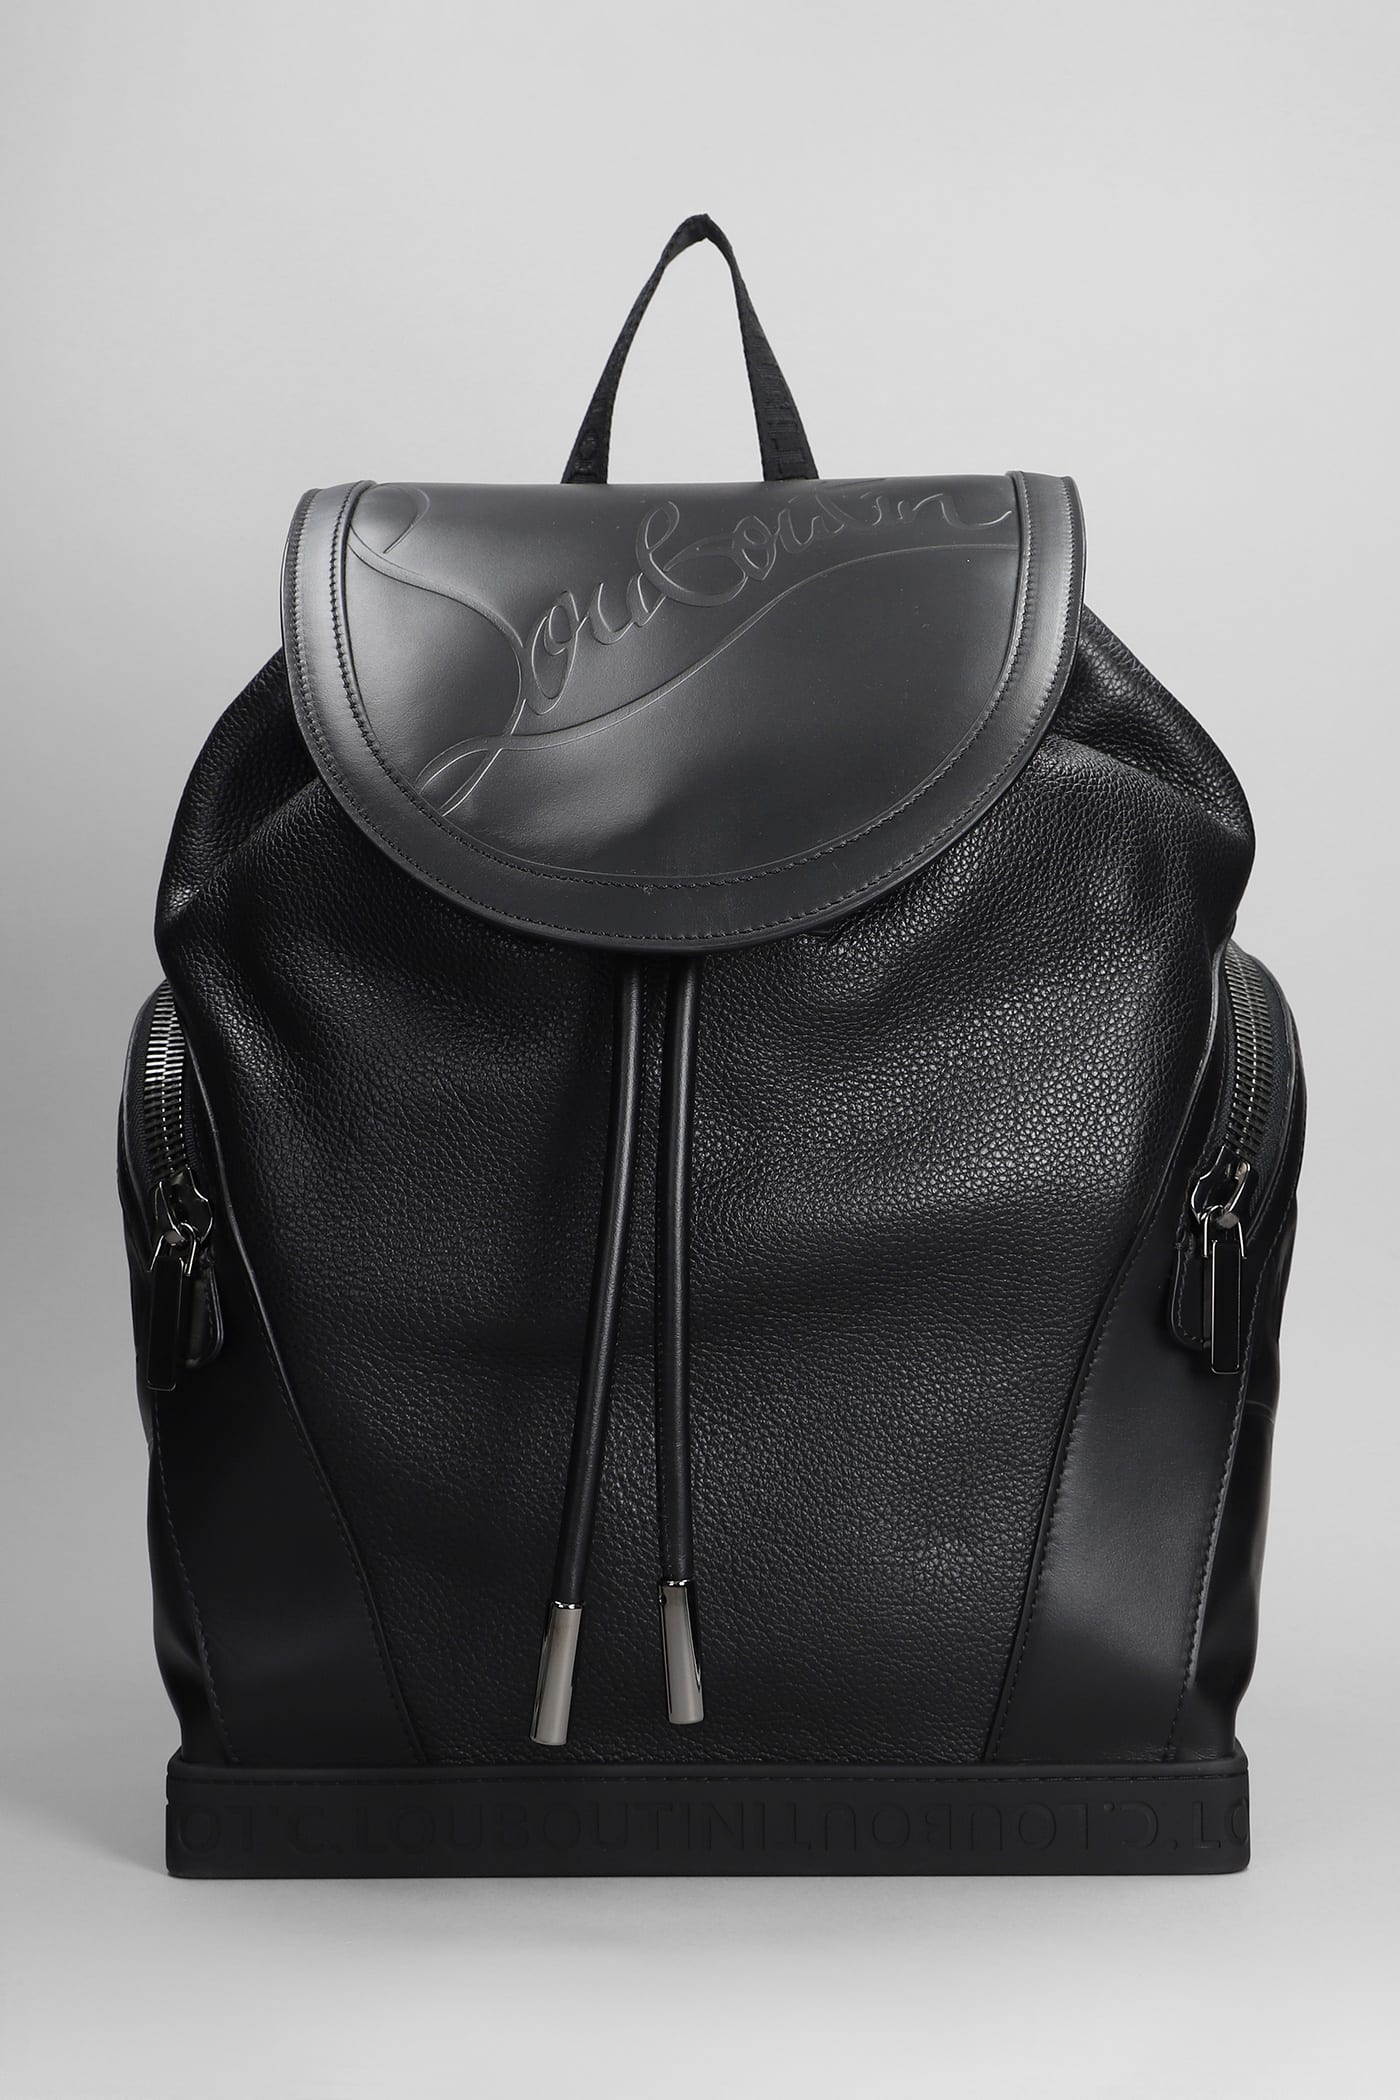 Explorafunk S Backpack In Black Leather